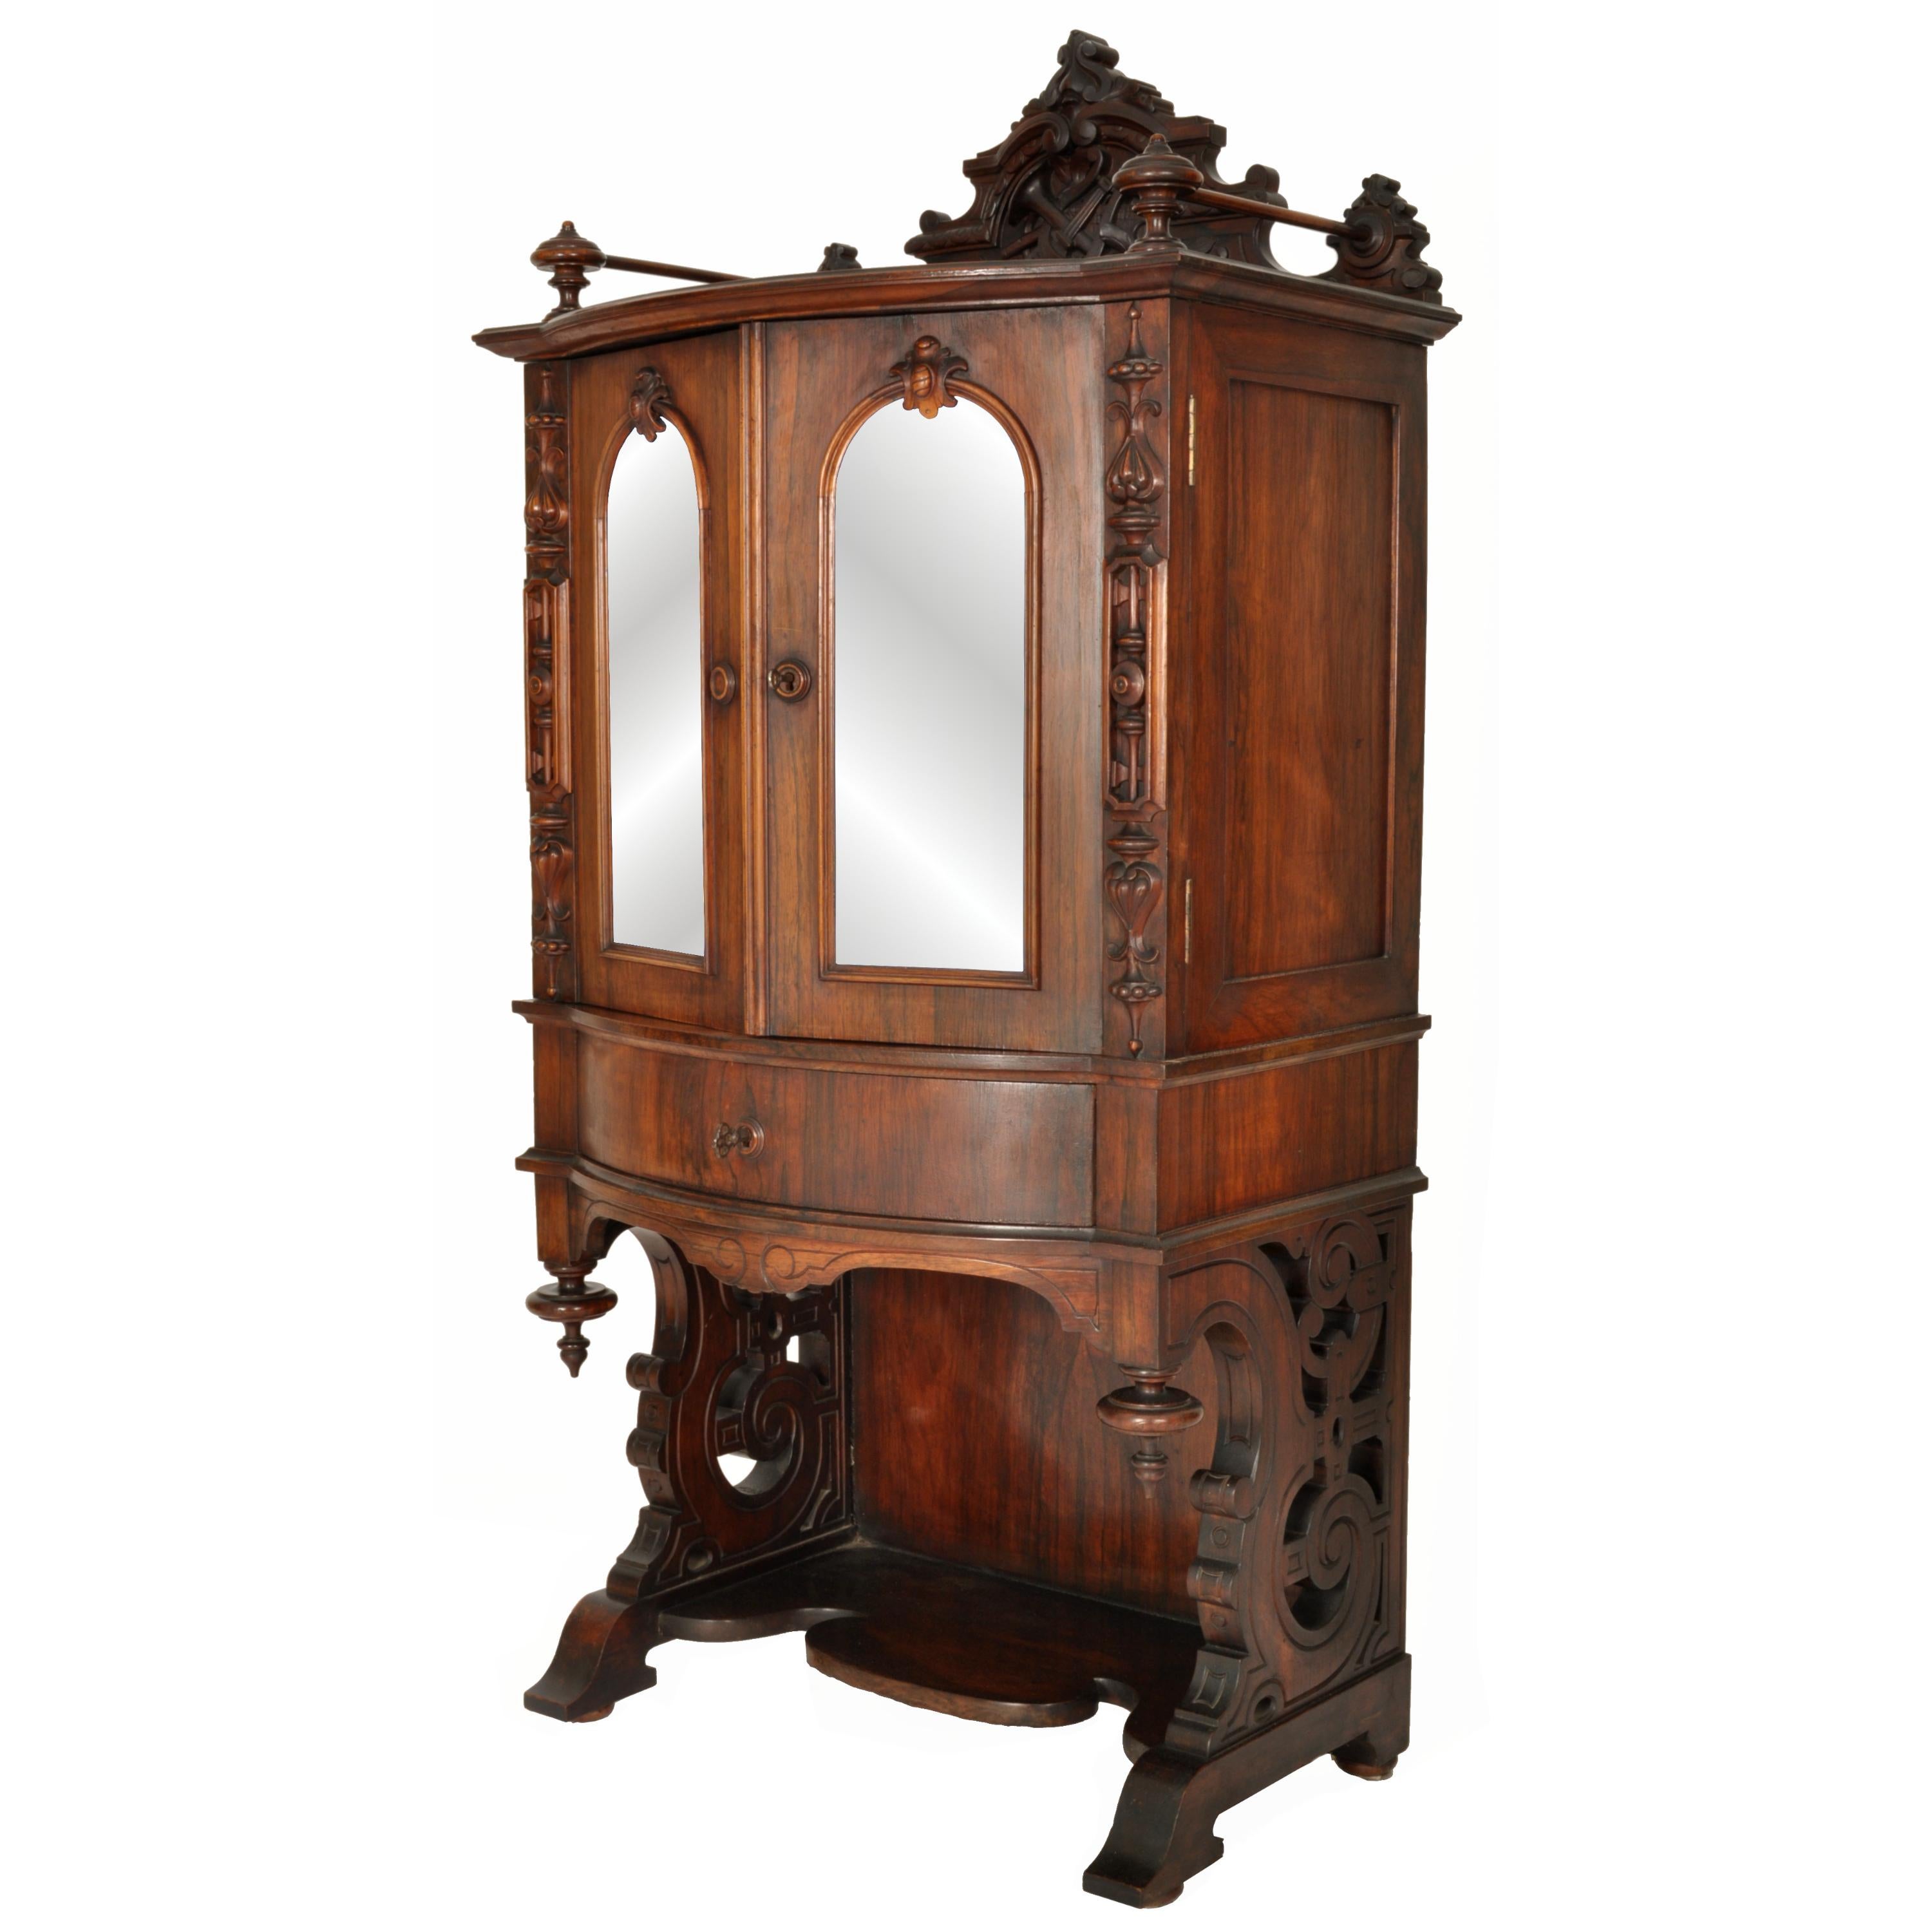 Hand-Carved Antique American Renaissance Revival Rosewood Carved Music Cabinet, Circa 1870